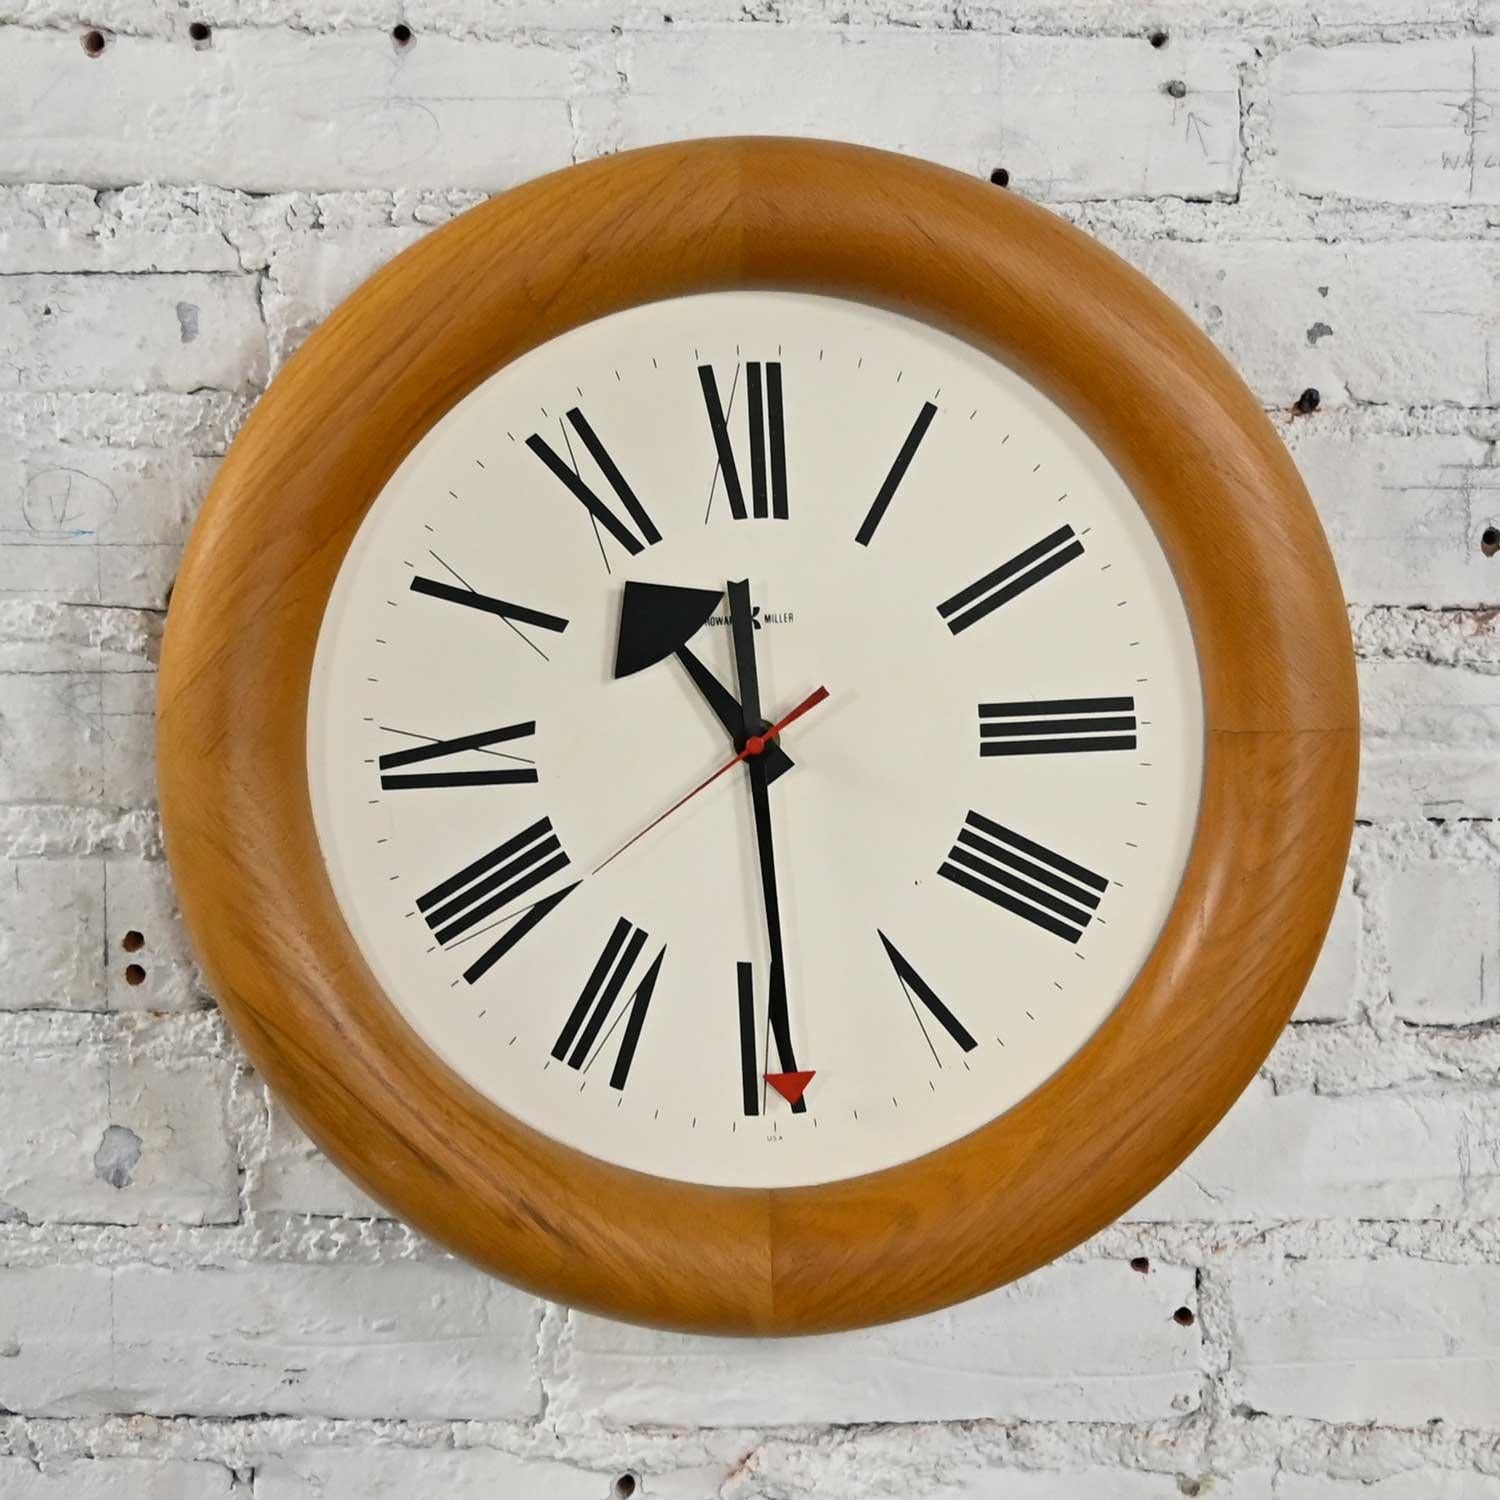 Marvelous vintage Stationmaster #611 round natural oak wall clock by Arthur Umanoff for Howard Miller clocks. Beautiful condition, keeping in mind that this is vintage and not new so will have signs of use and wear. There is a scratch in the paint